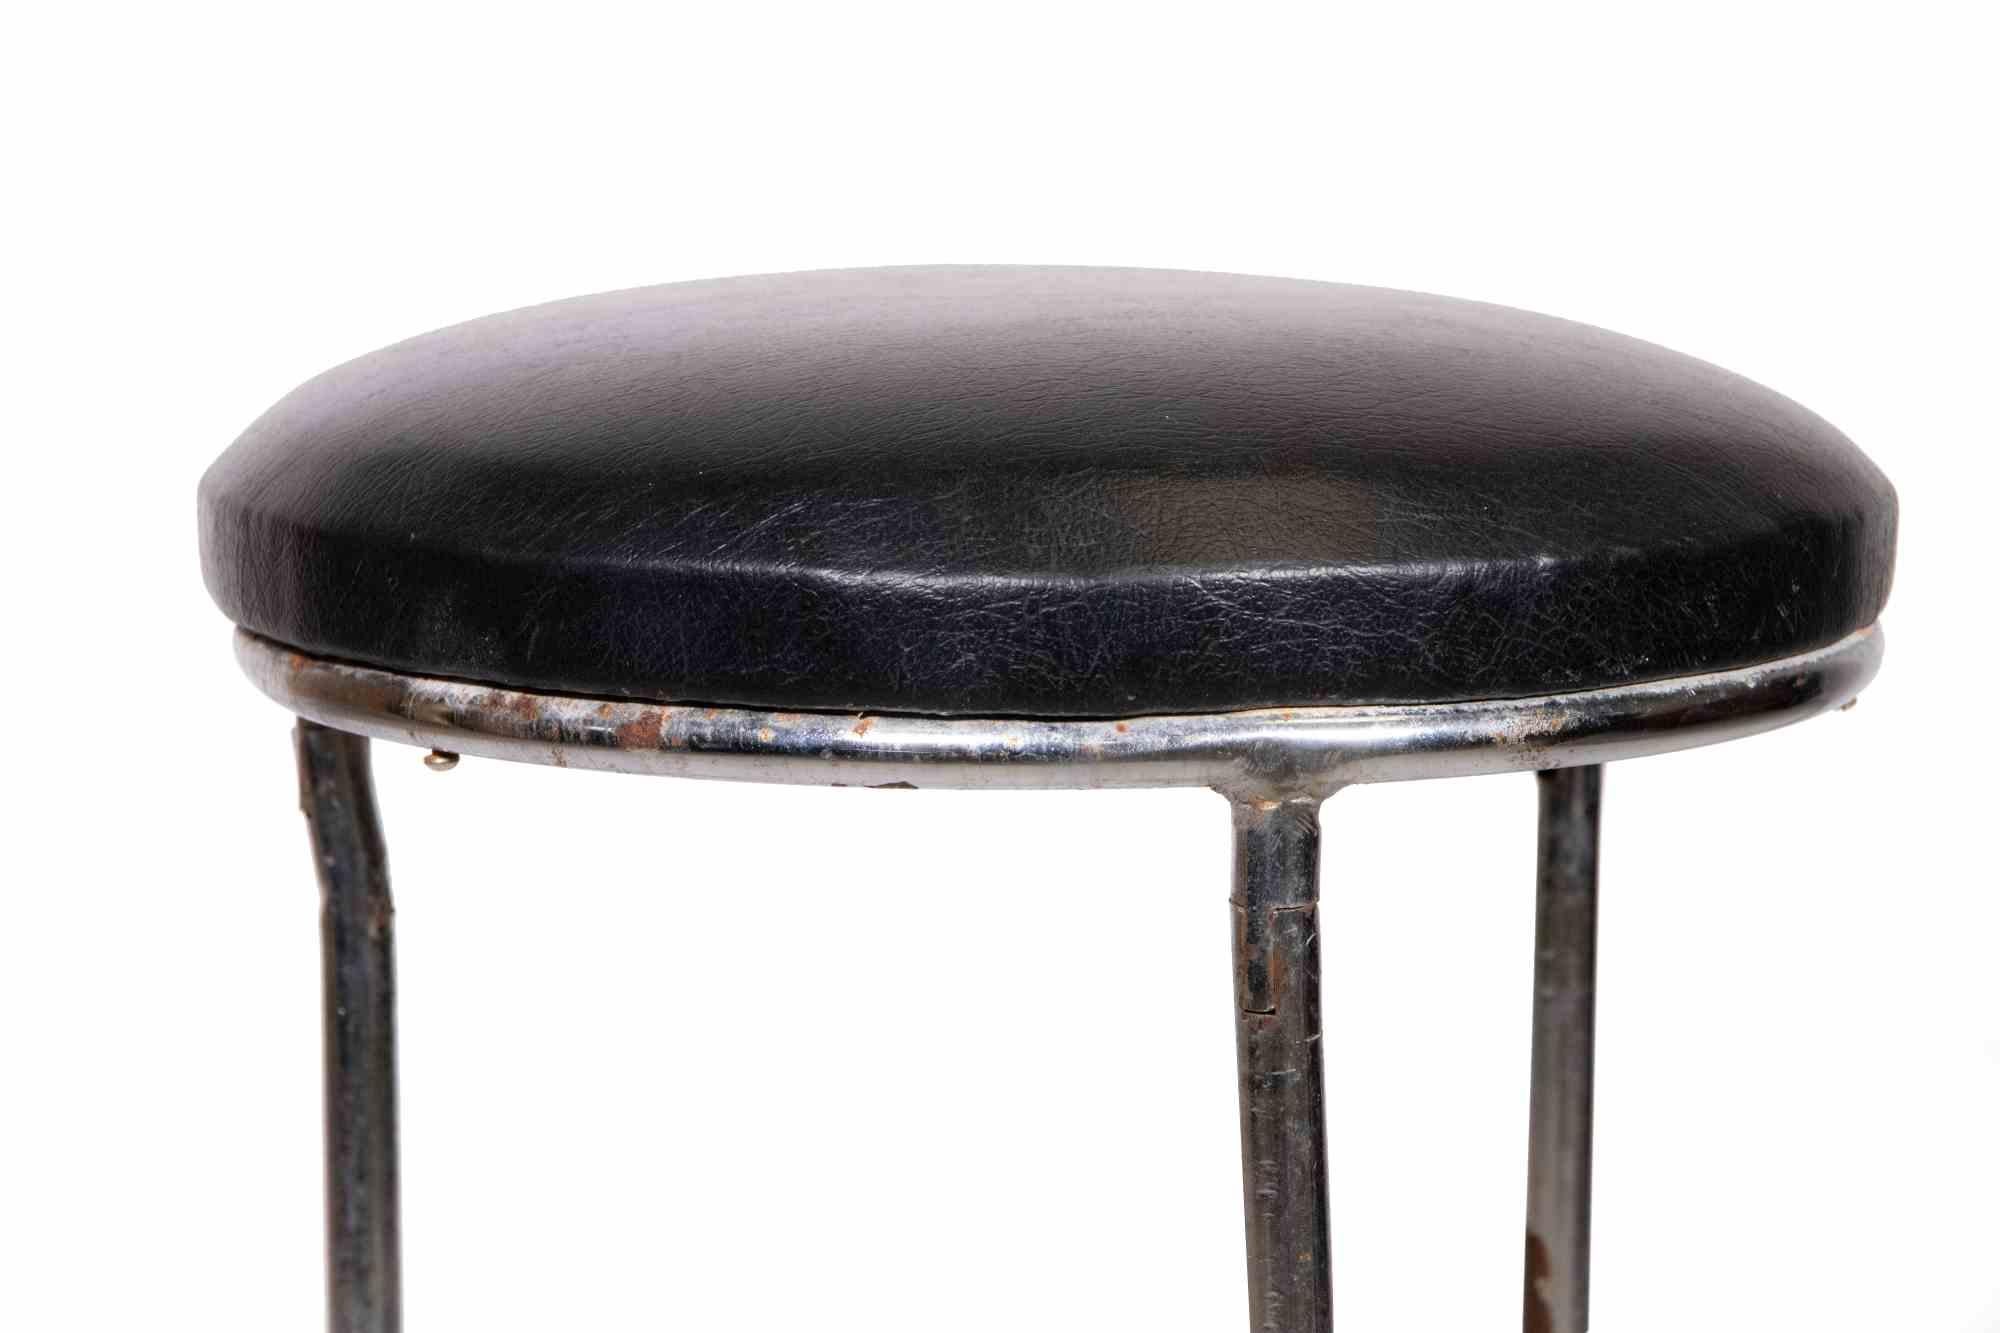 Vintage leather stool is an original design item realized in the 1970s.

Black and leather stool with red rubber seal on legs.

Fair conditions.